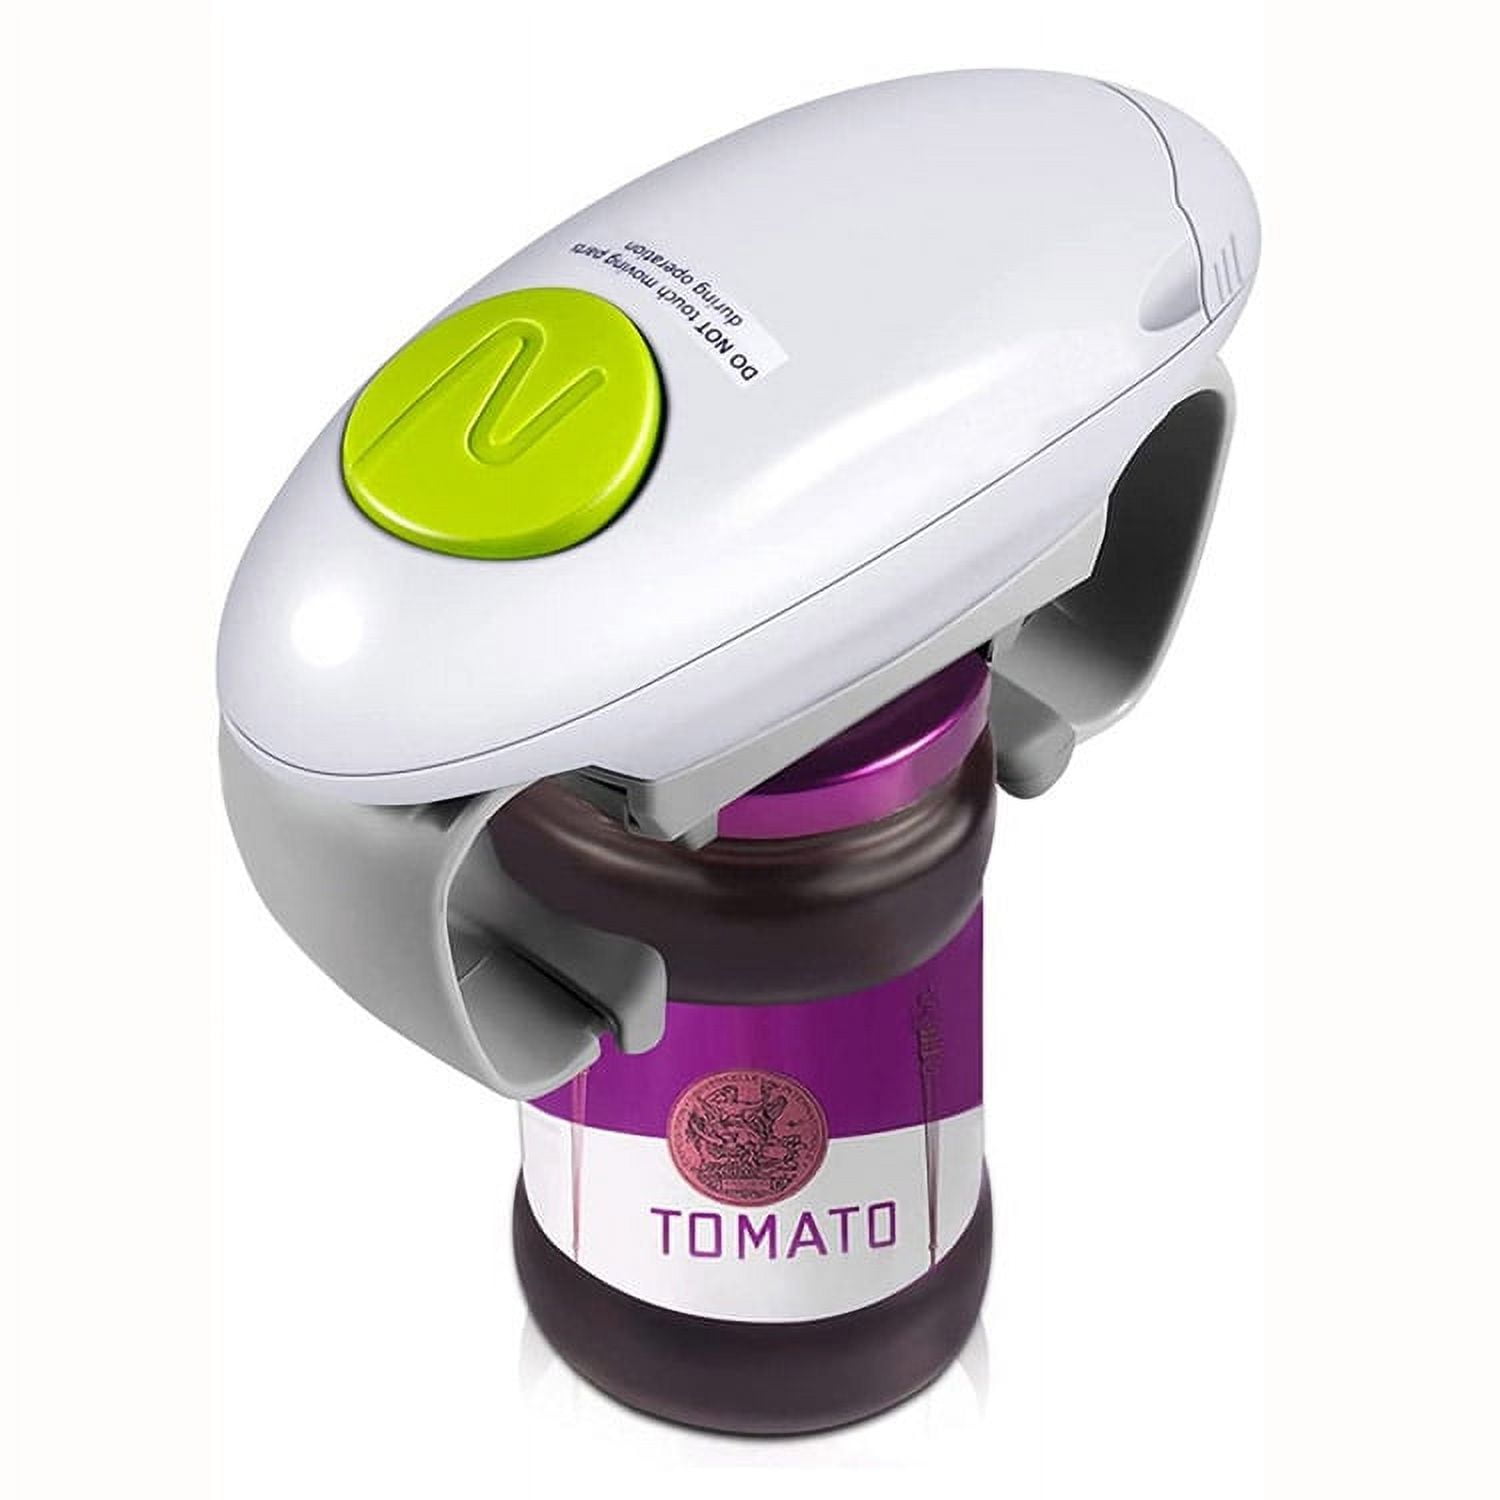 Electric Jar Opener, Kitchen Battery Operated Automatic Jar Openers Prime  for Seniors with Arthritis/Weak Hands from LIFETWO